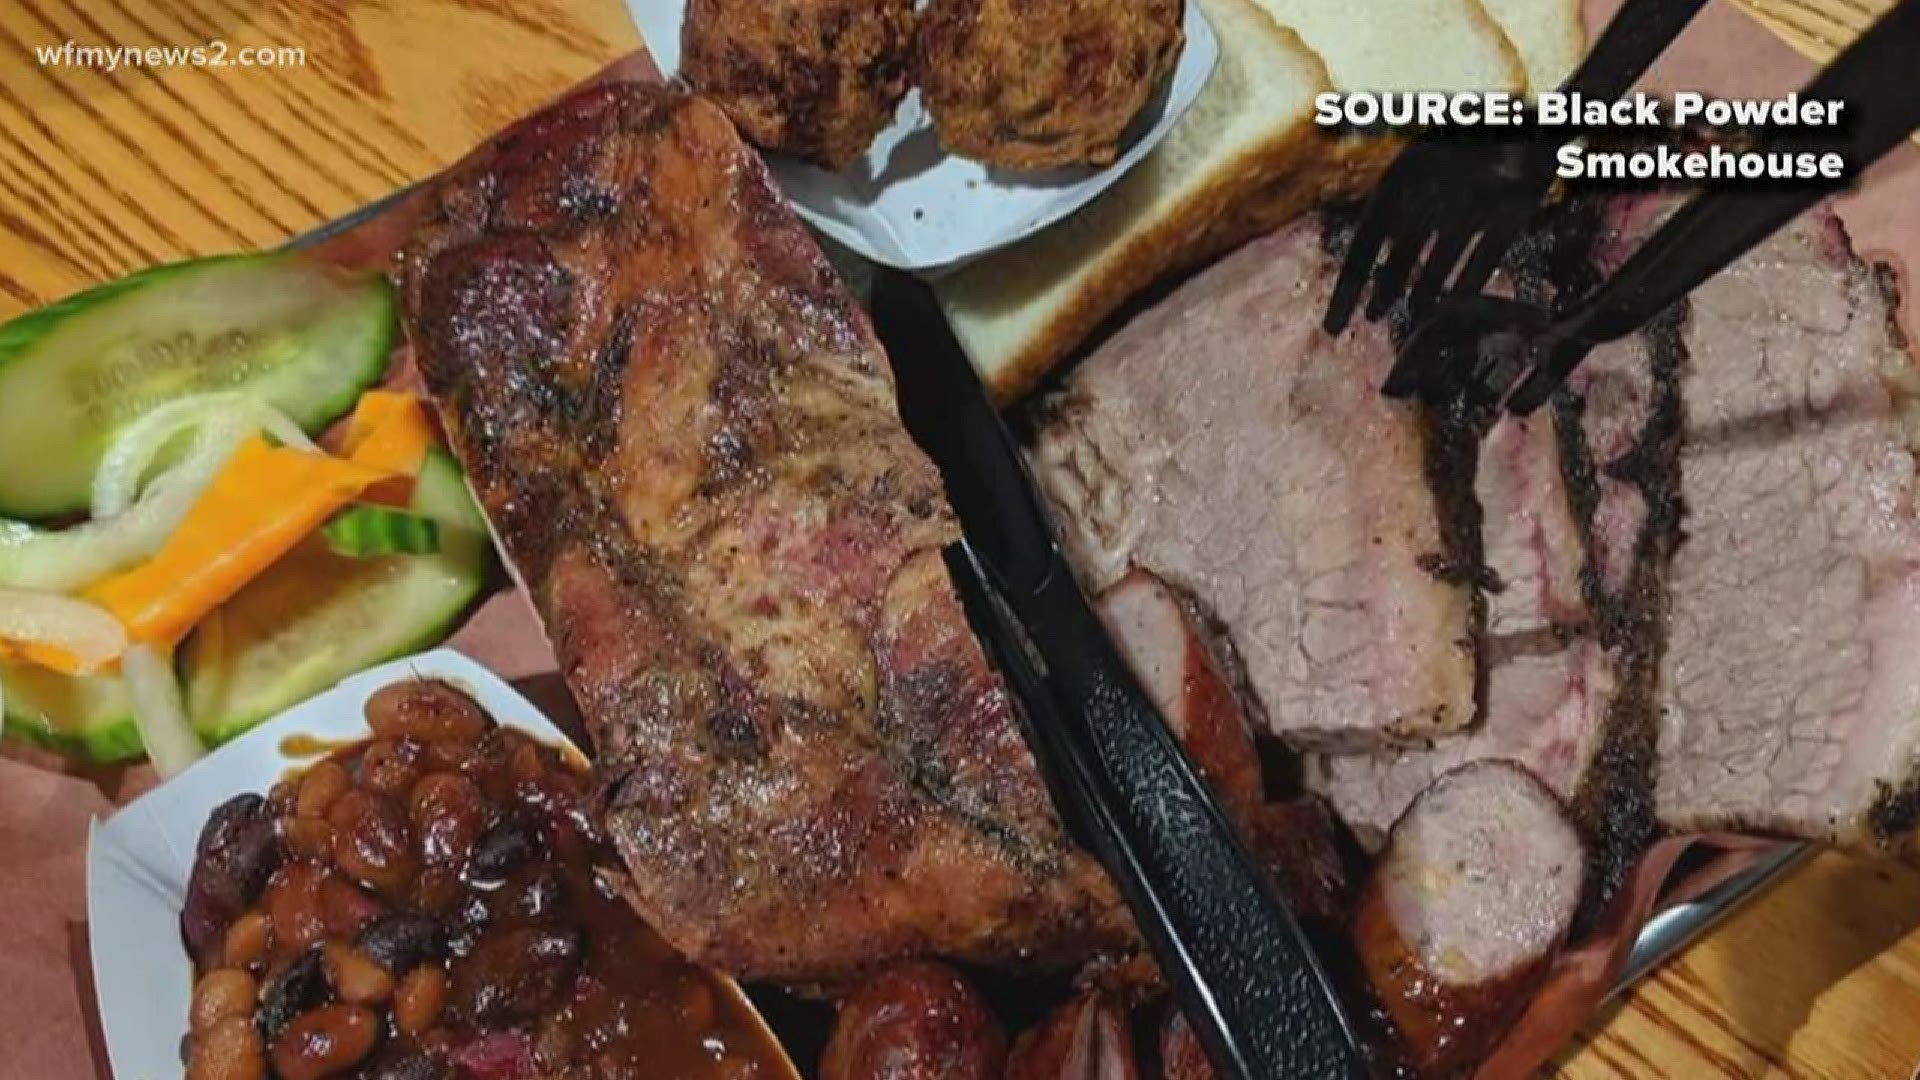 Black Powder Smokehouse’s location used to be Hugh’s Oil before transforming into the smokehouse. The restaurant says their brisket is their top seller.